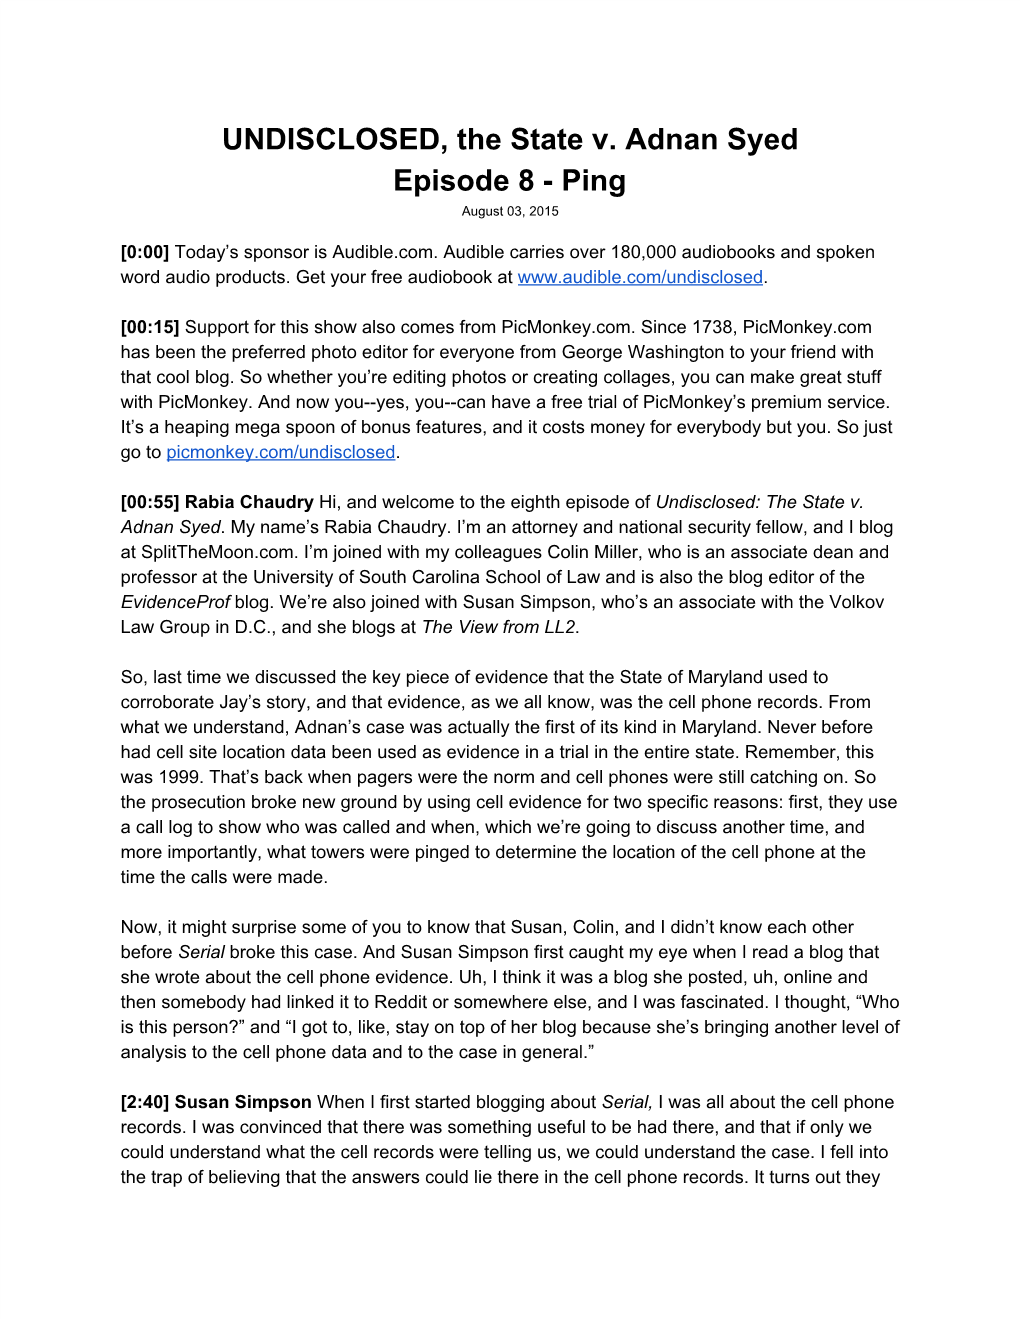 UNDISCLOSED, the State V. Adnan Syed Episode 8 - Ping August 03, 2015